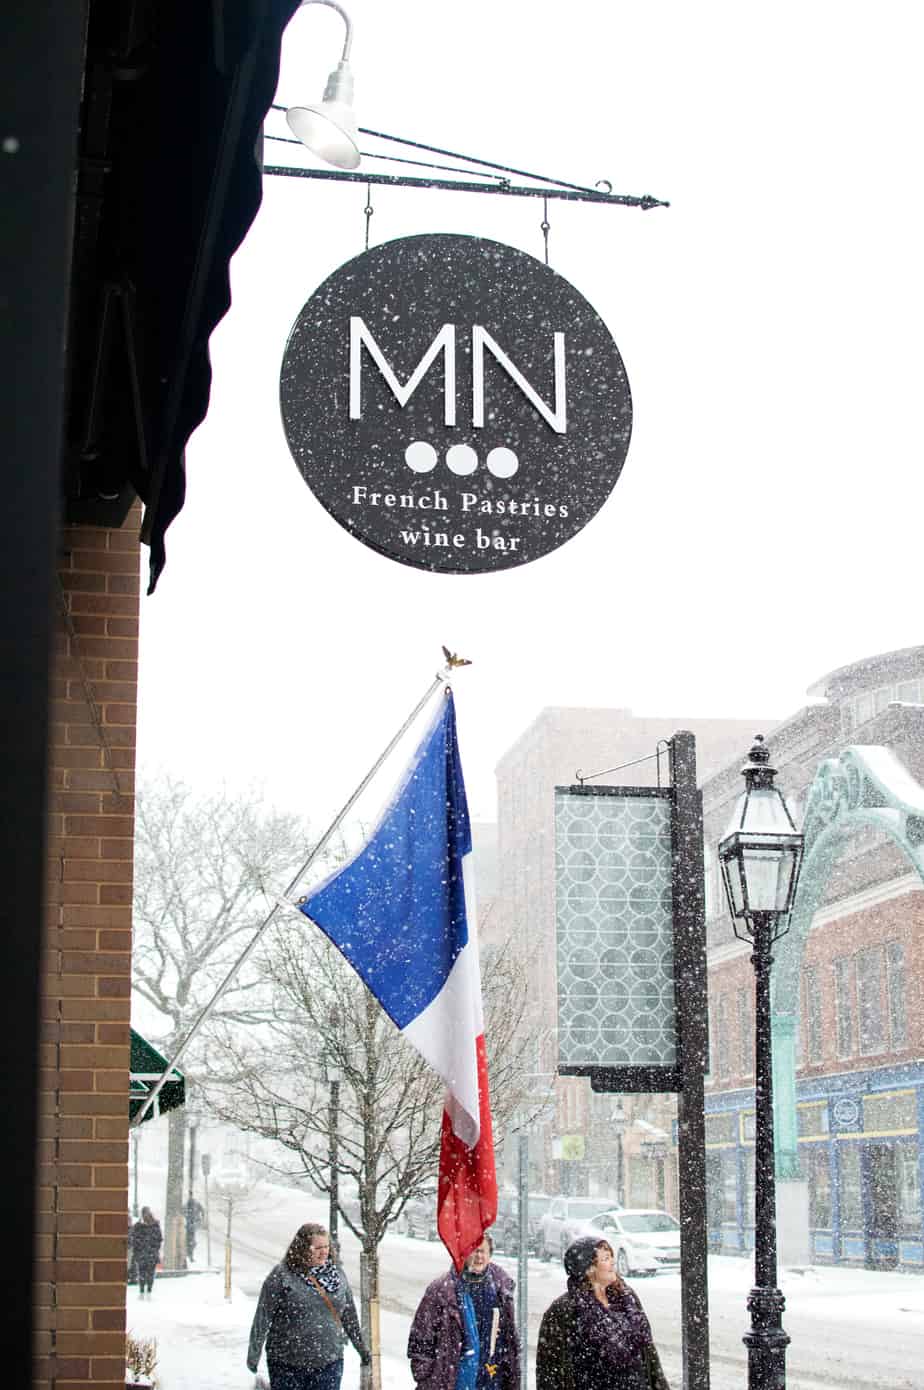 People walking down the sidewalk in the snow past a wine bar